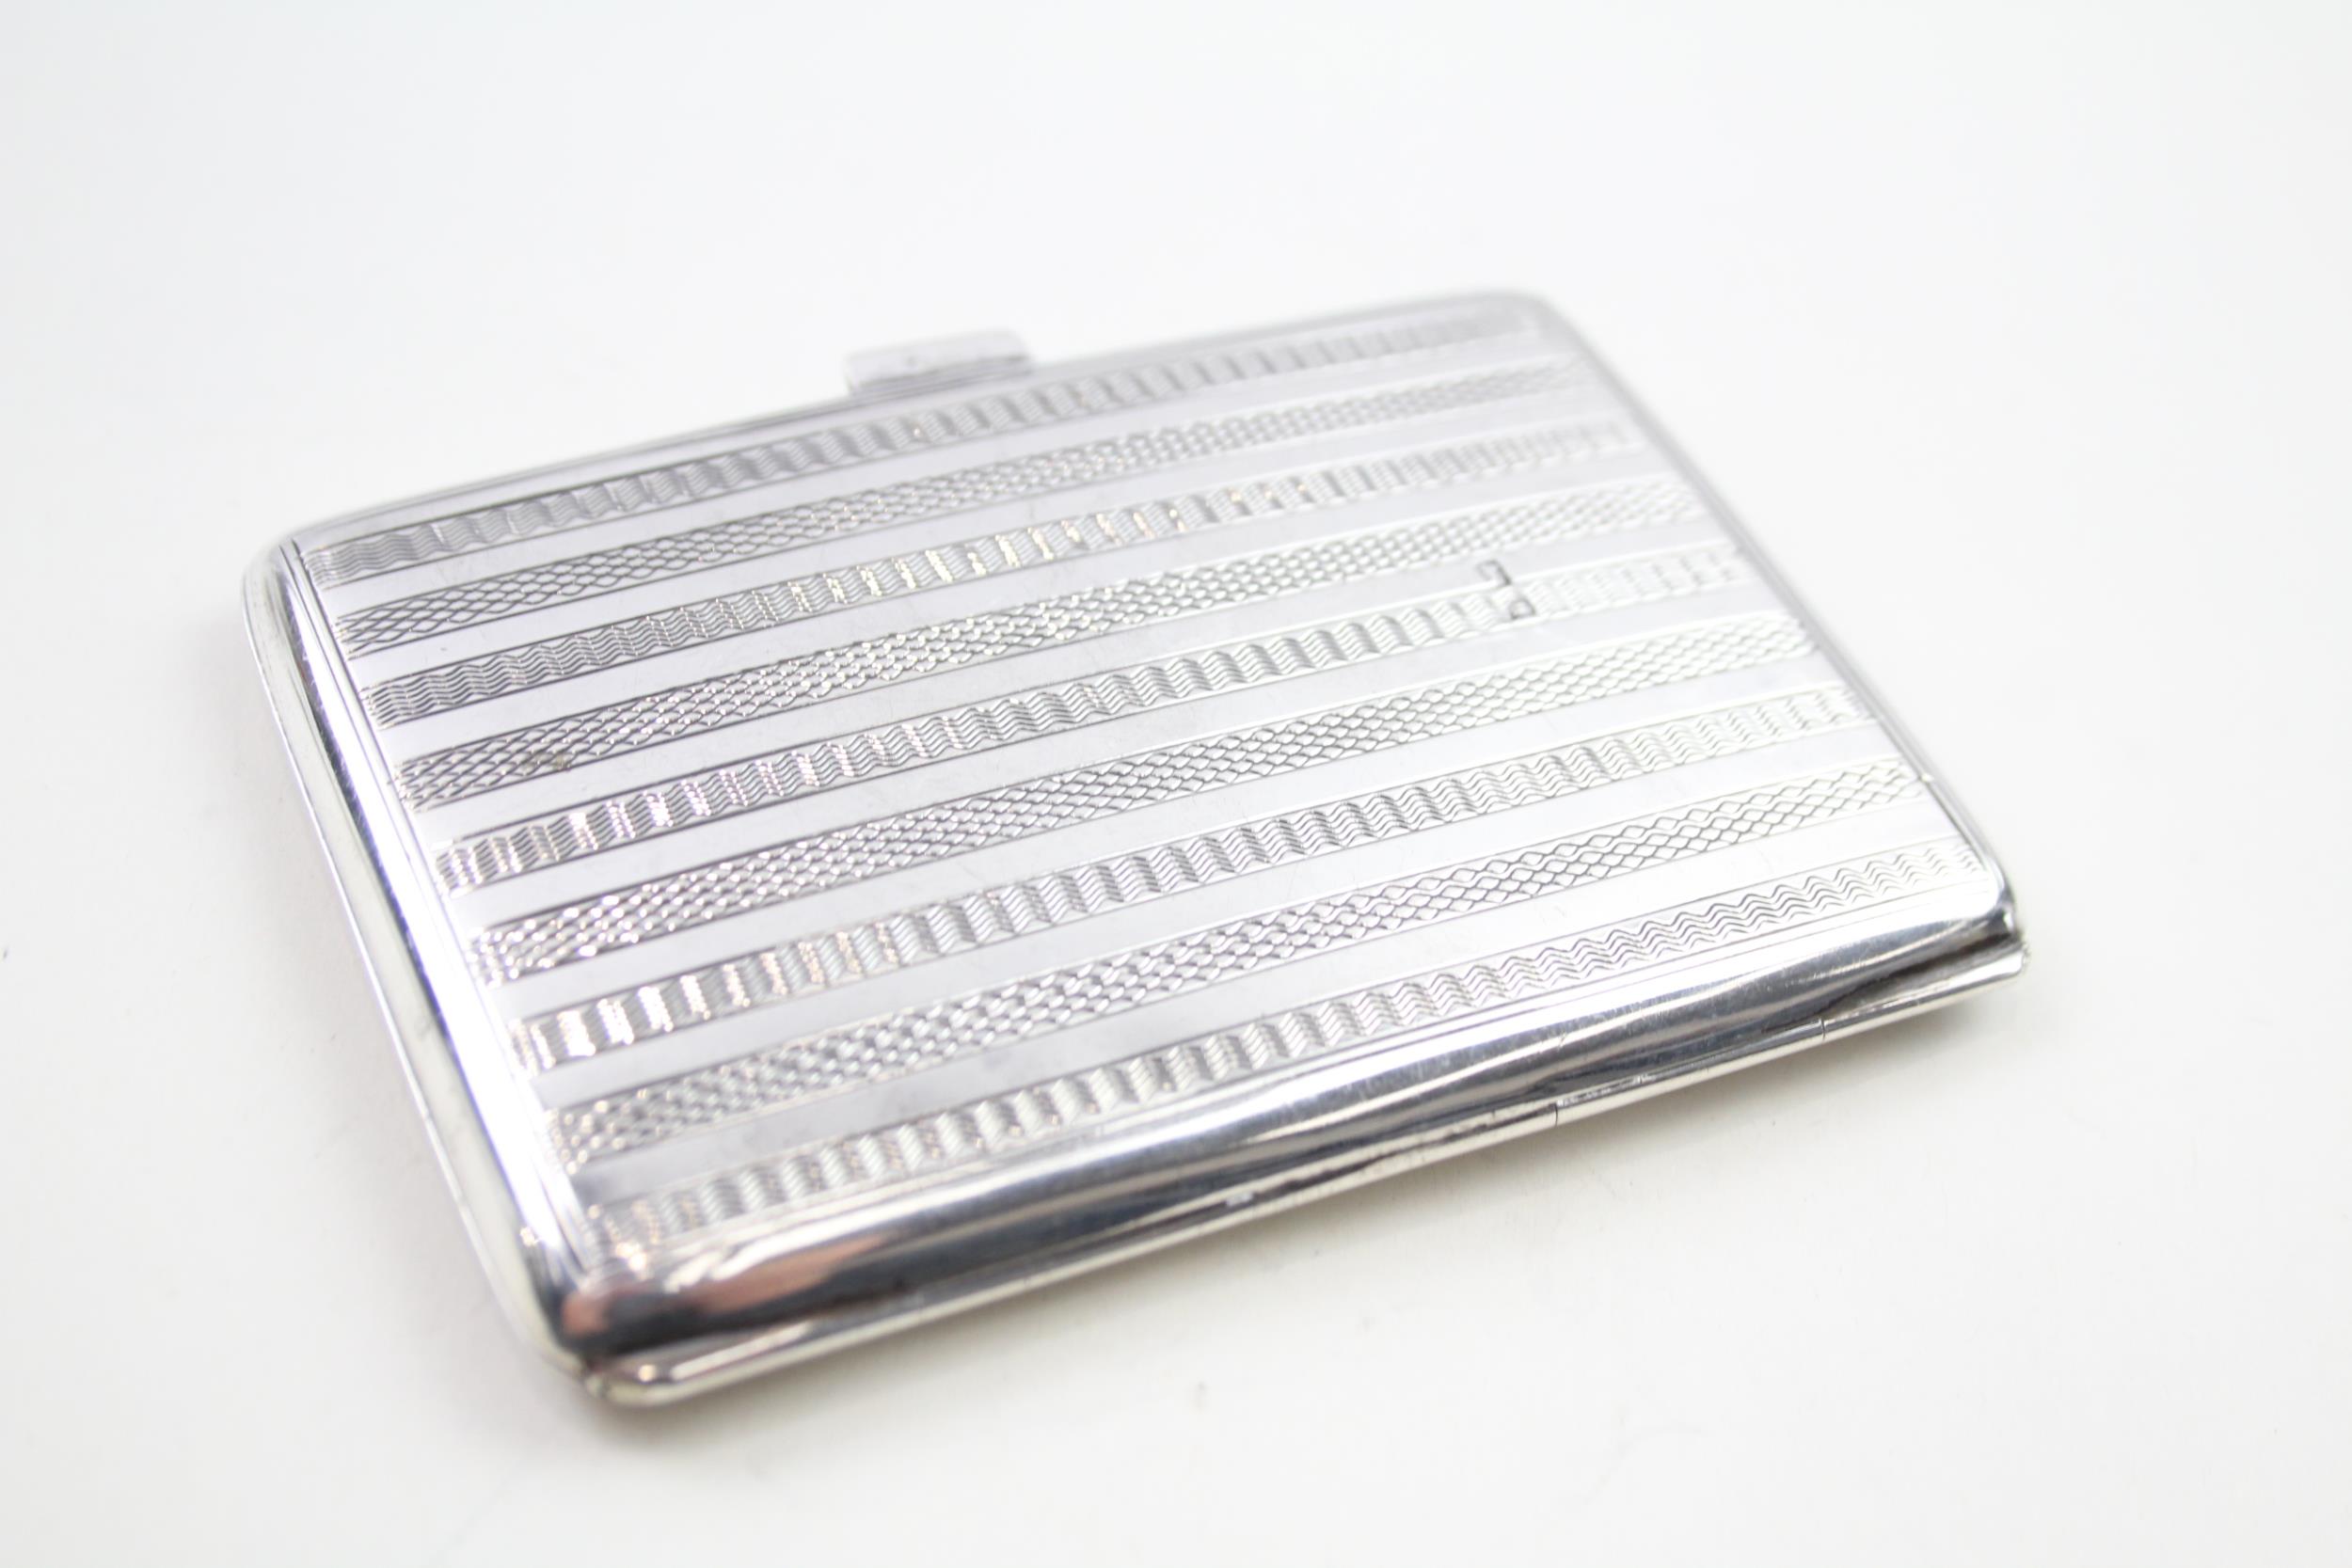 Antique Edwardian 1907 Birmingham Sterling Silver Calling Card Case (78g) - w/ Personal Engraving - Image 5 of 7